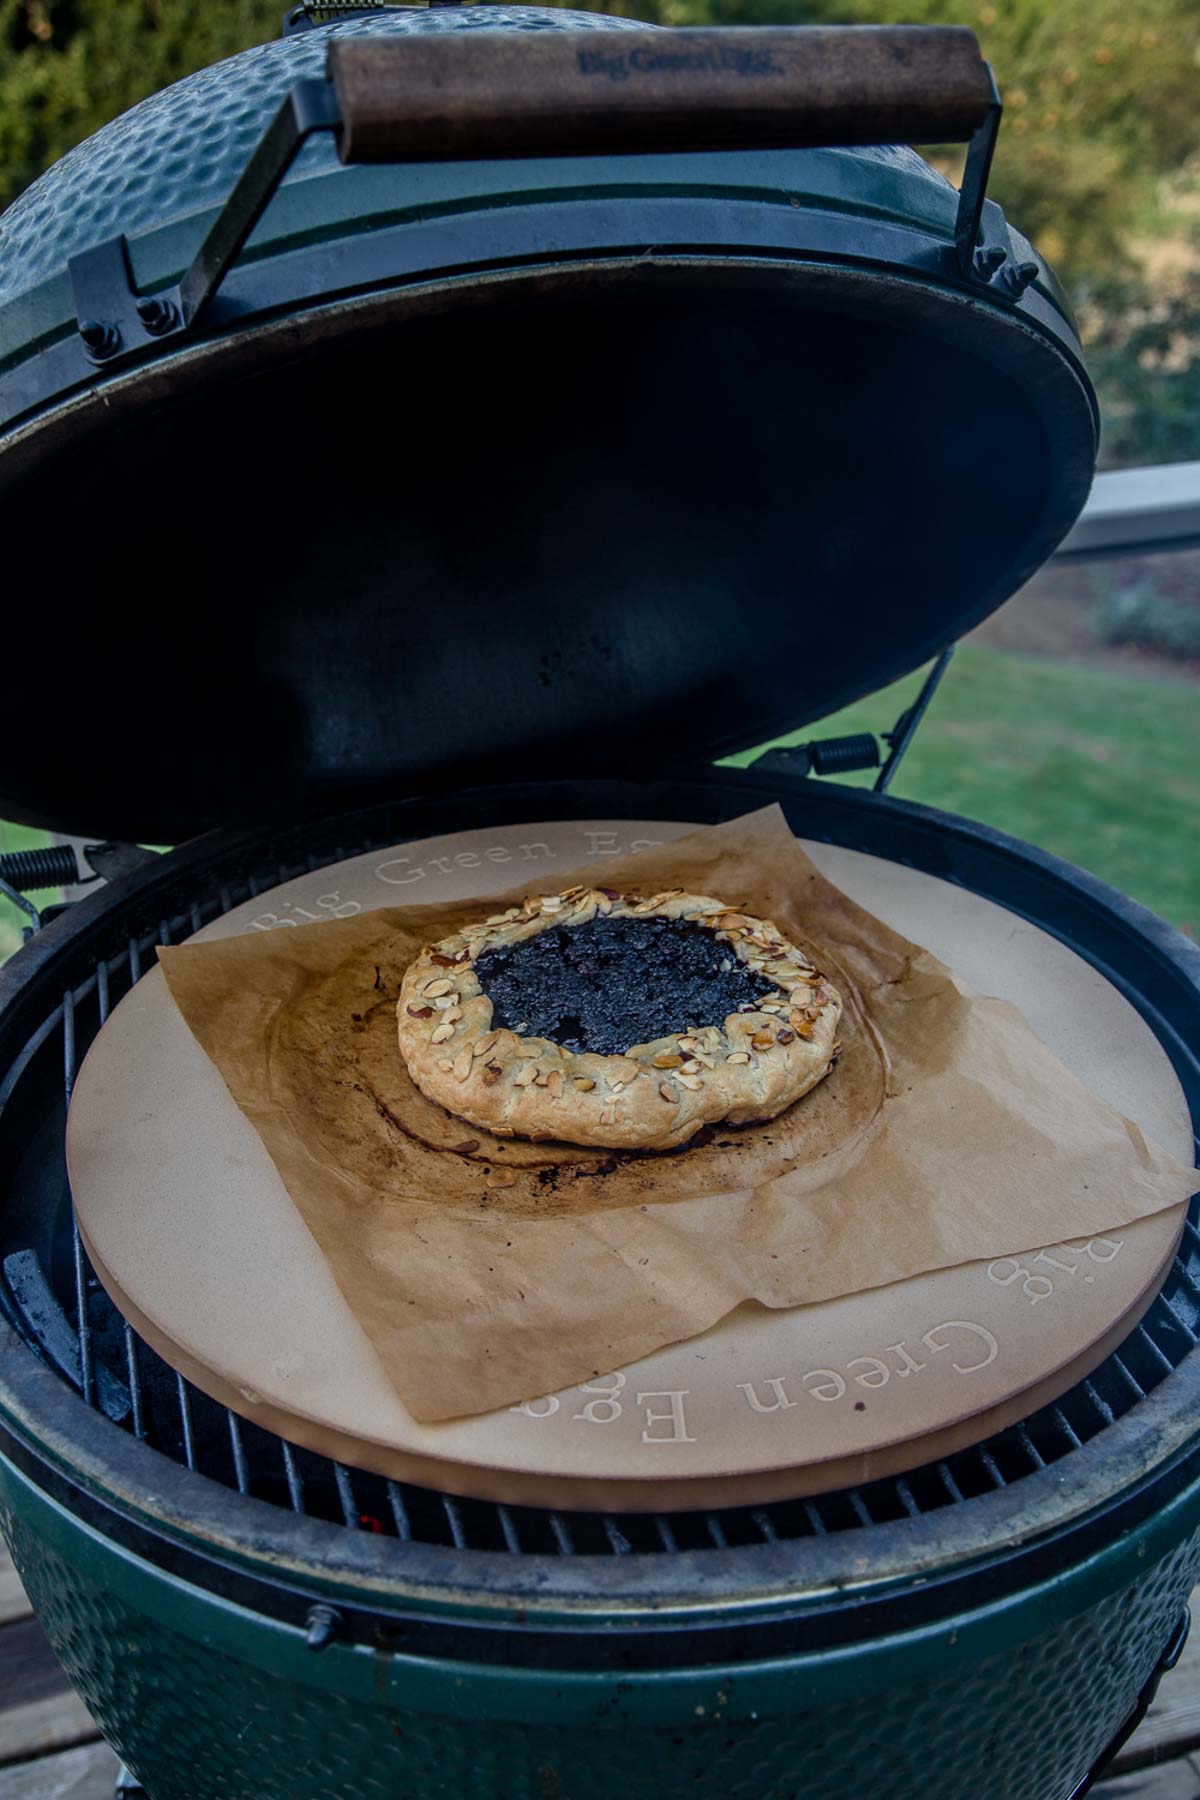 Blackberry crostata cooking on a Big Green Egg grill